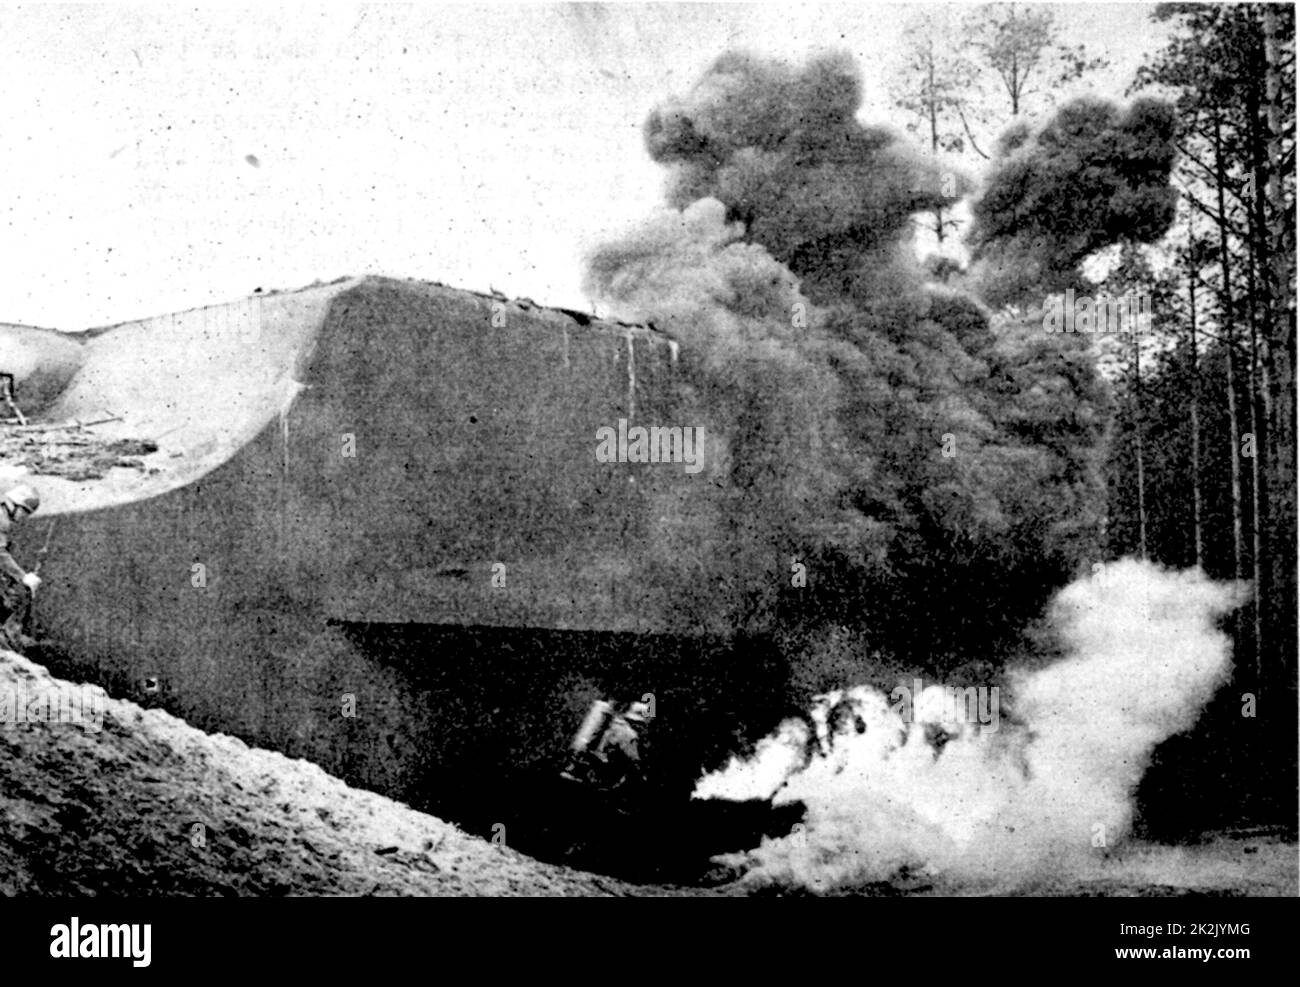 World War II: Nazi (German) demonstration of how French defensive Maginot Line forts were destroyed by attack with flame-throwers and grenades. In some places the Maginot defences held for some time. Stock Photo